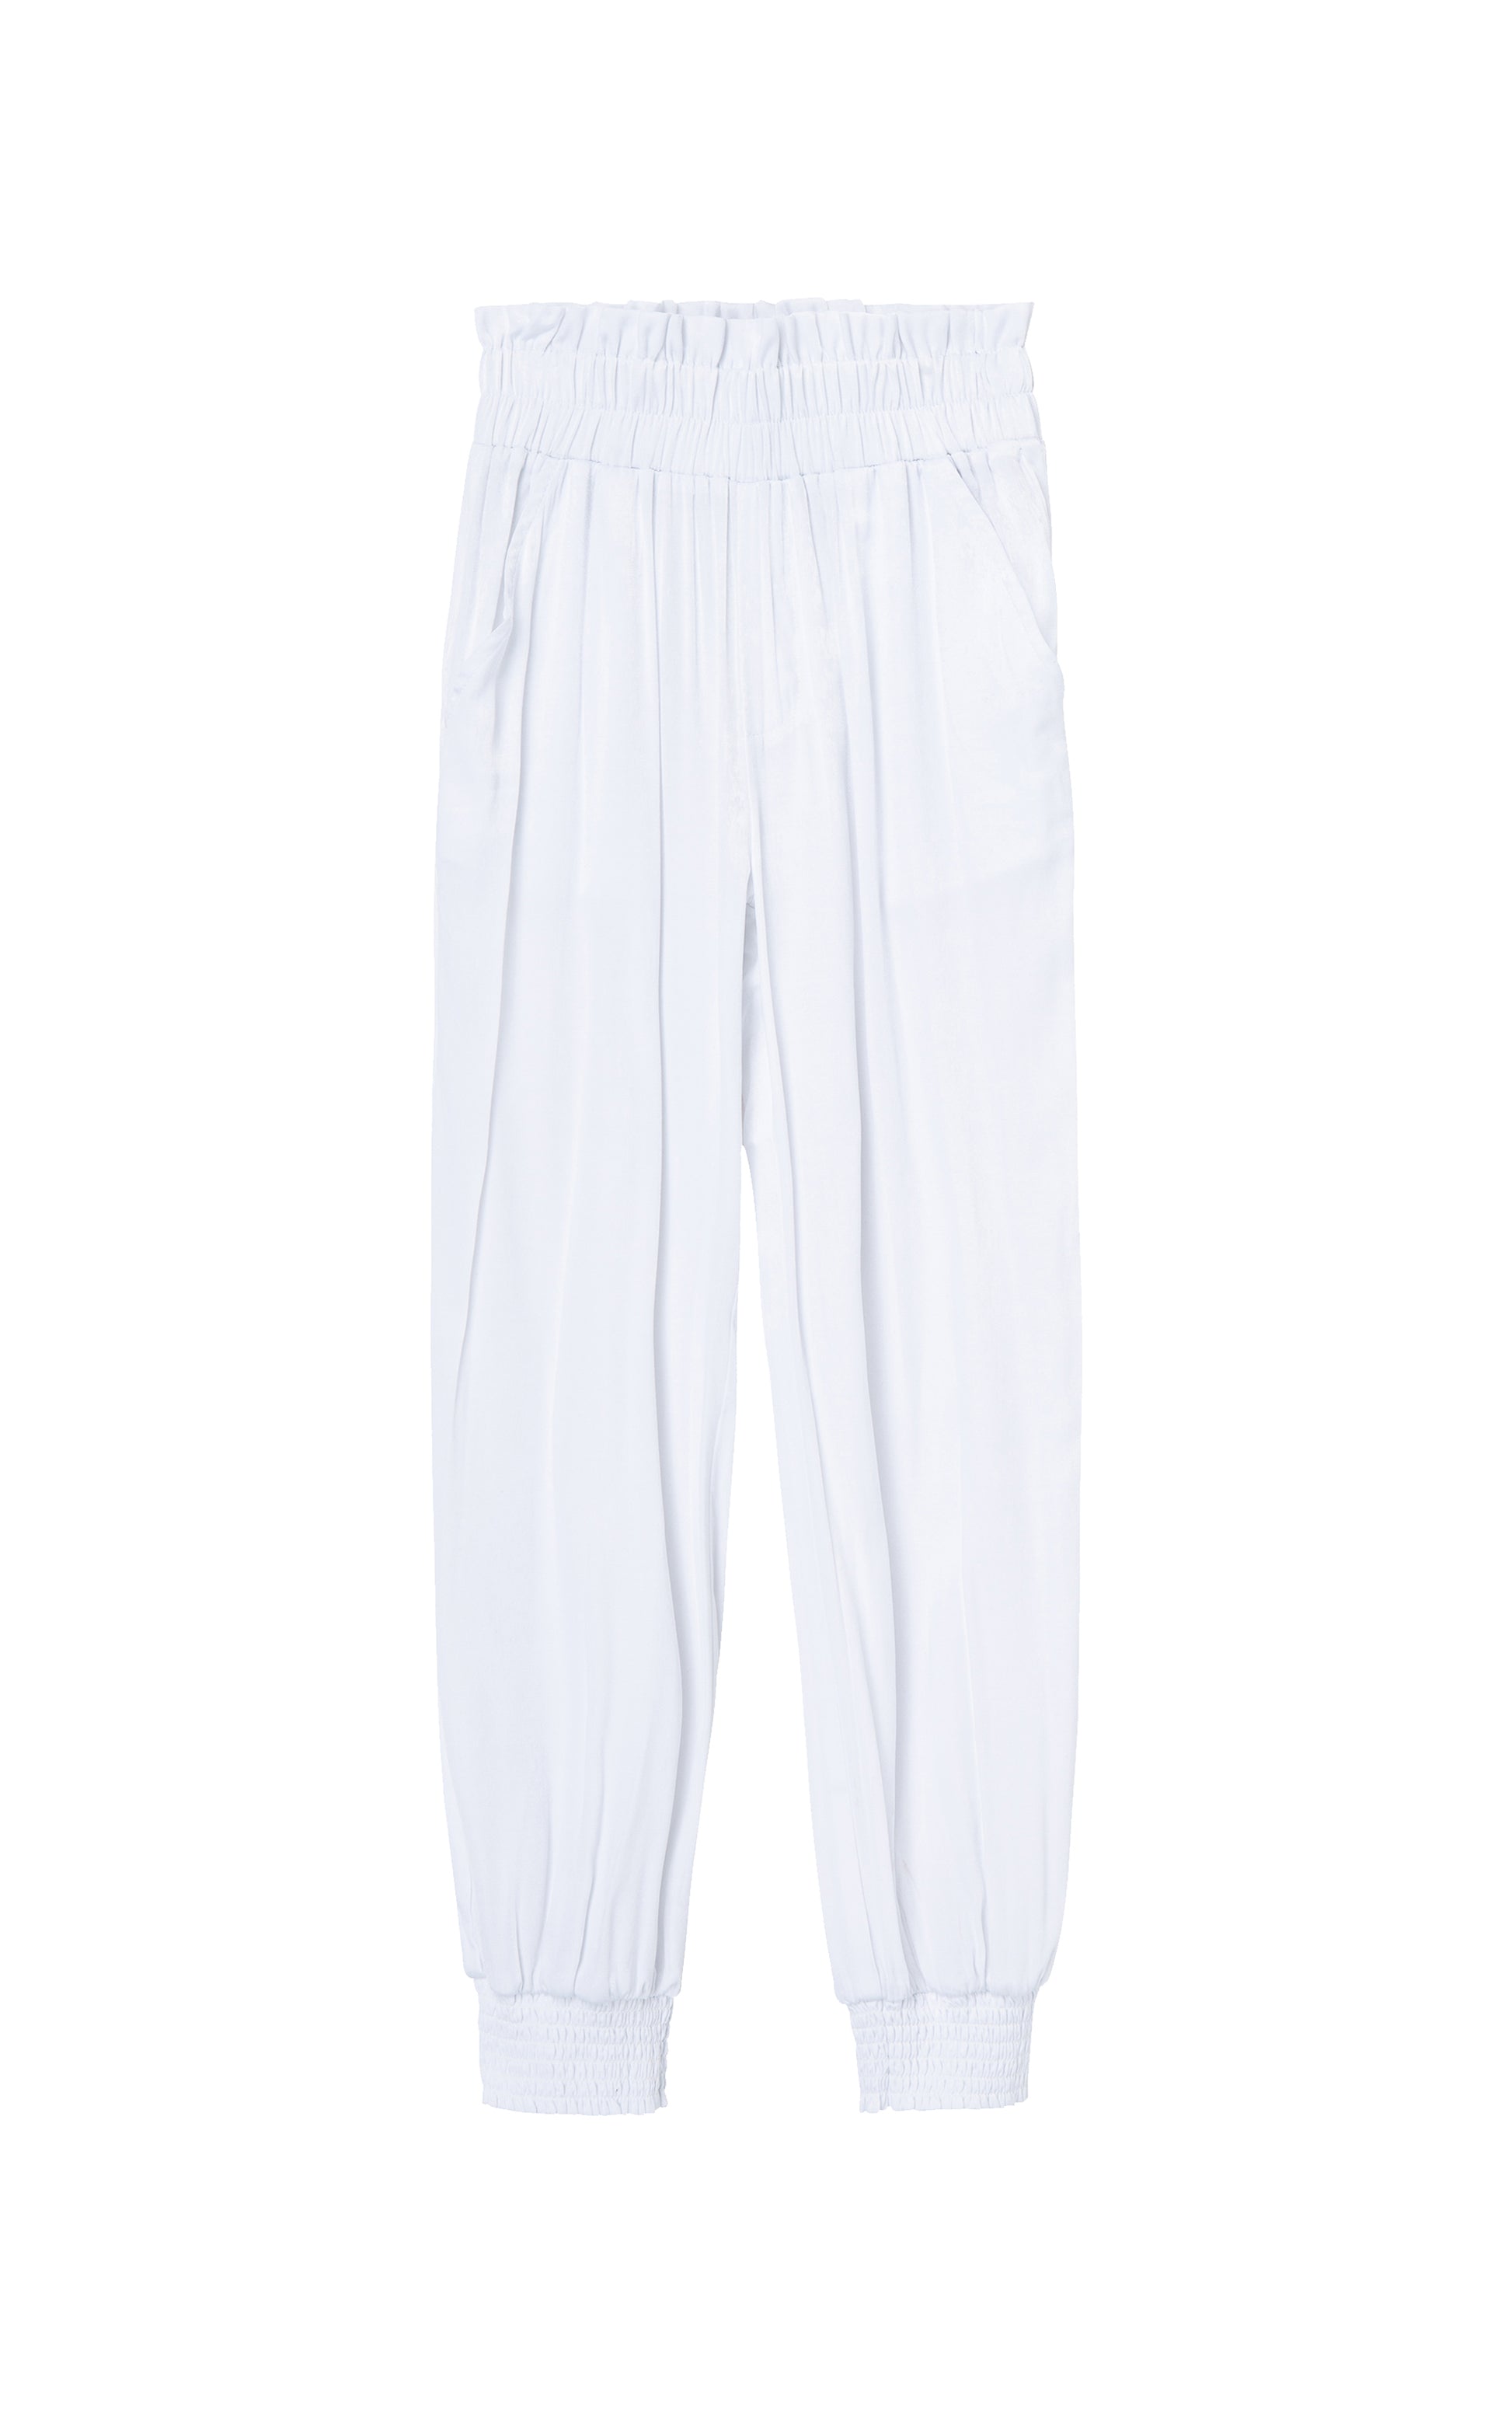 WHITE PULL ON PAPERBAG PANTS WITH SMOCKED WAISTBAND AND ANKLE CUFFS